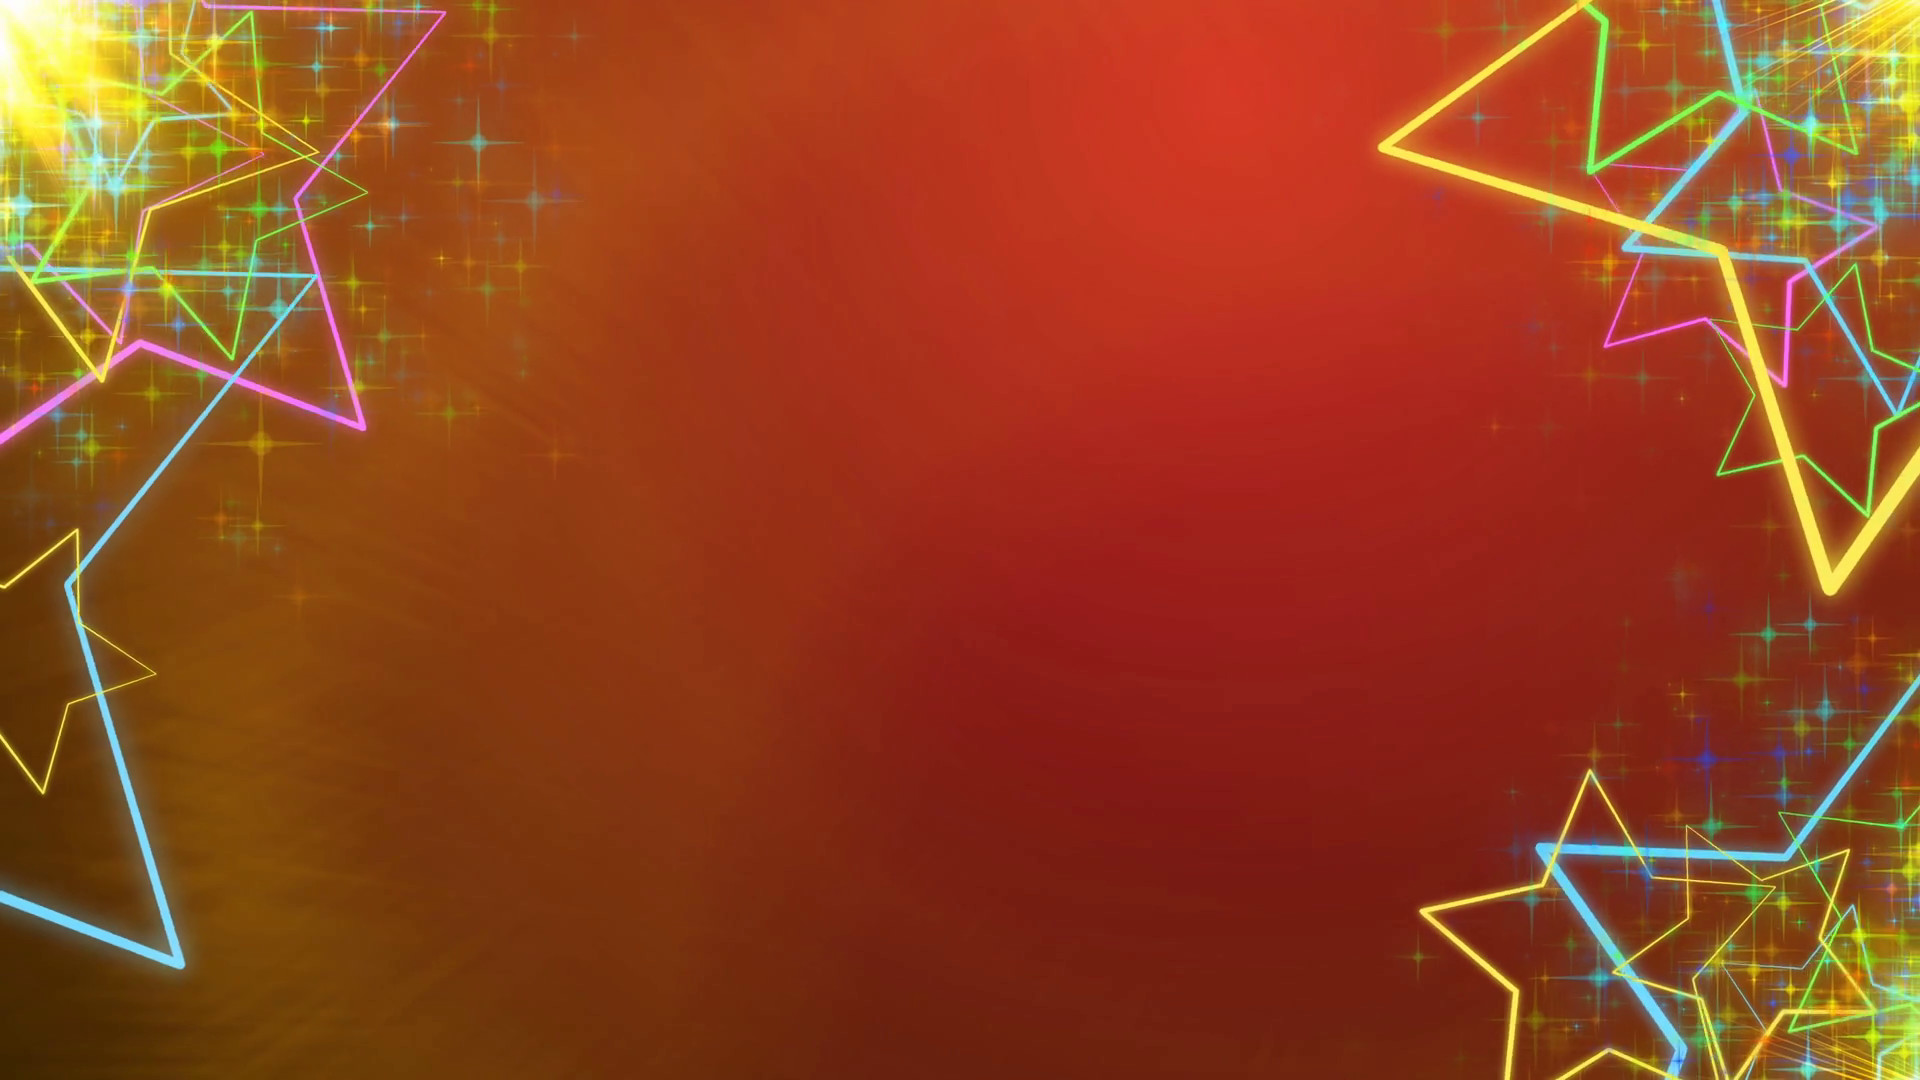 1920x1080 Red Holiday background with animated colorful stars in sides and with  copyspace in center.